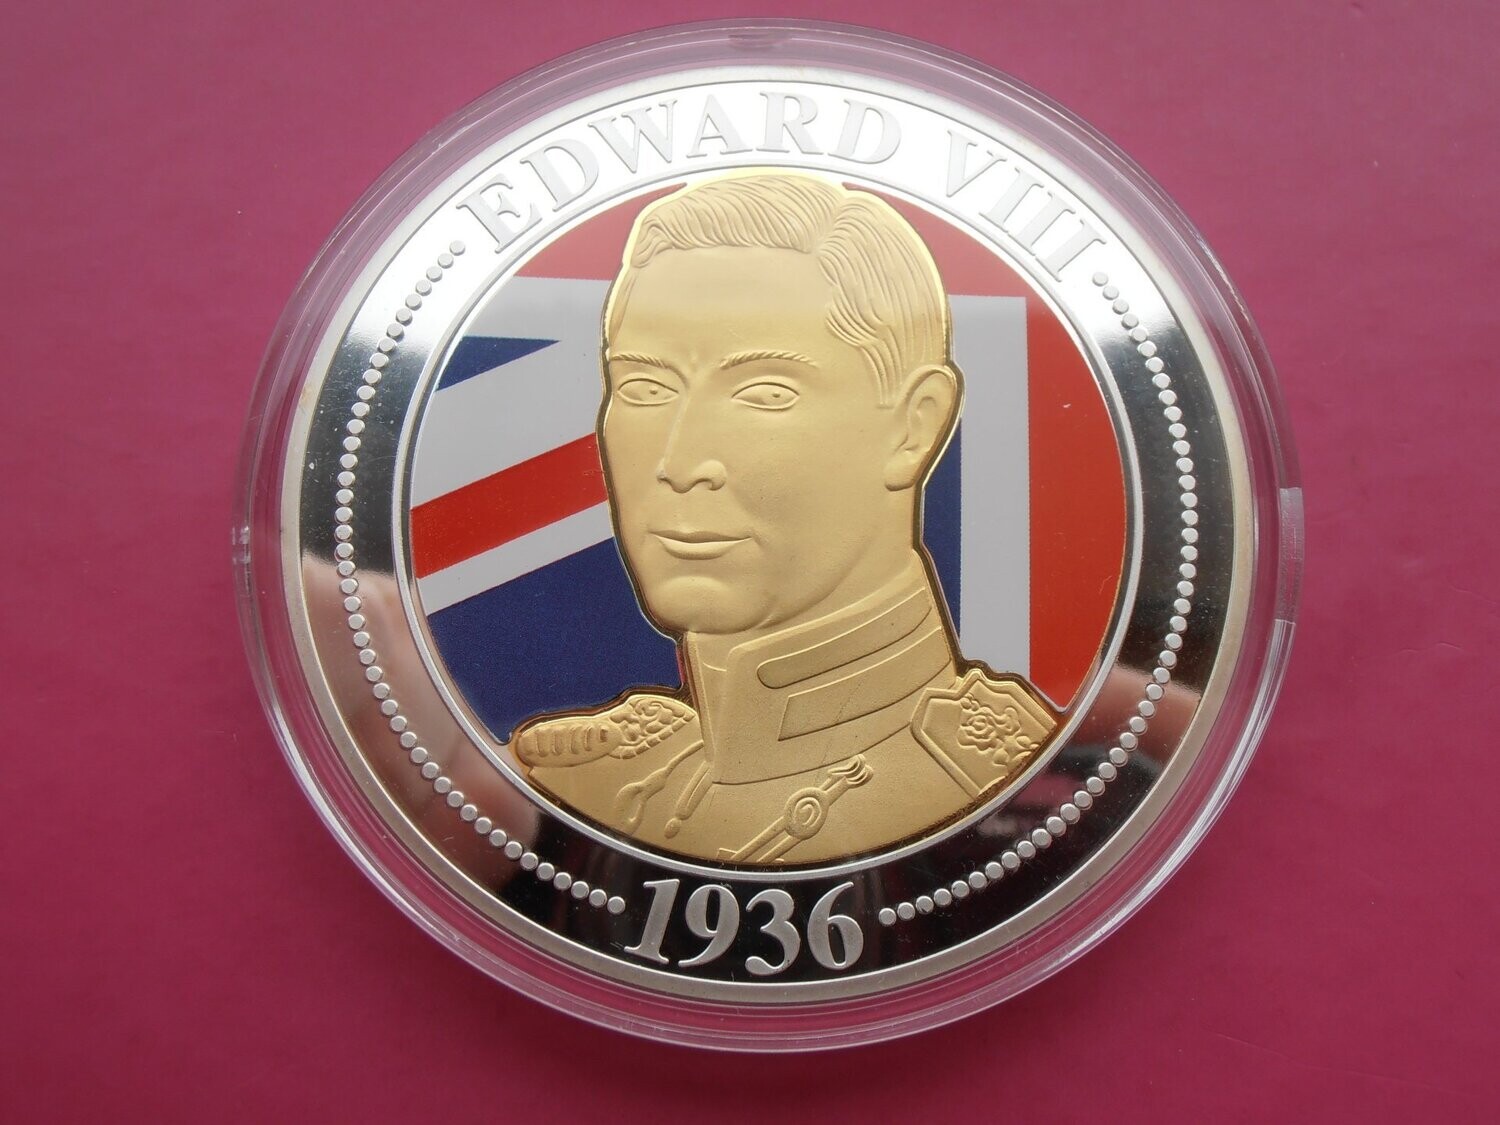 Year of the Three Kings Edward VIII Medal - 2011